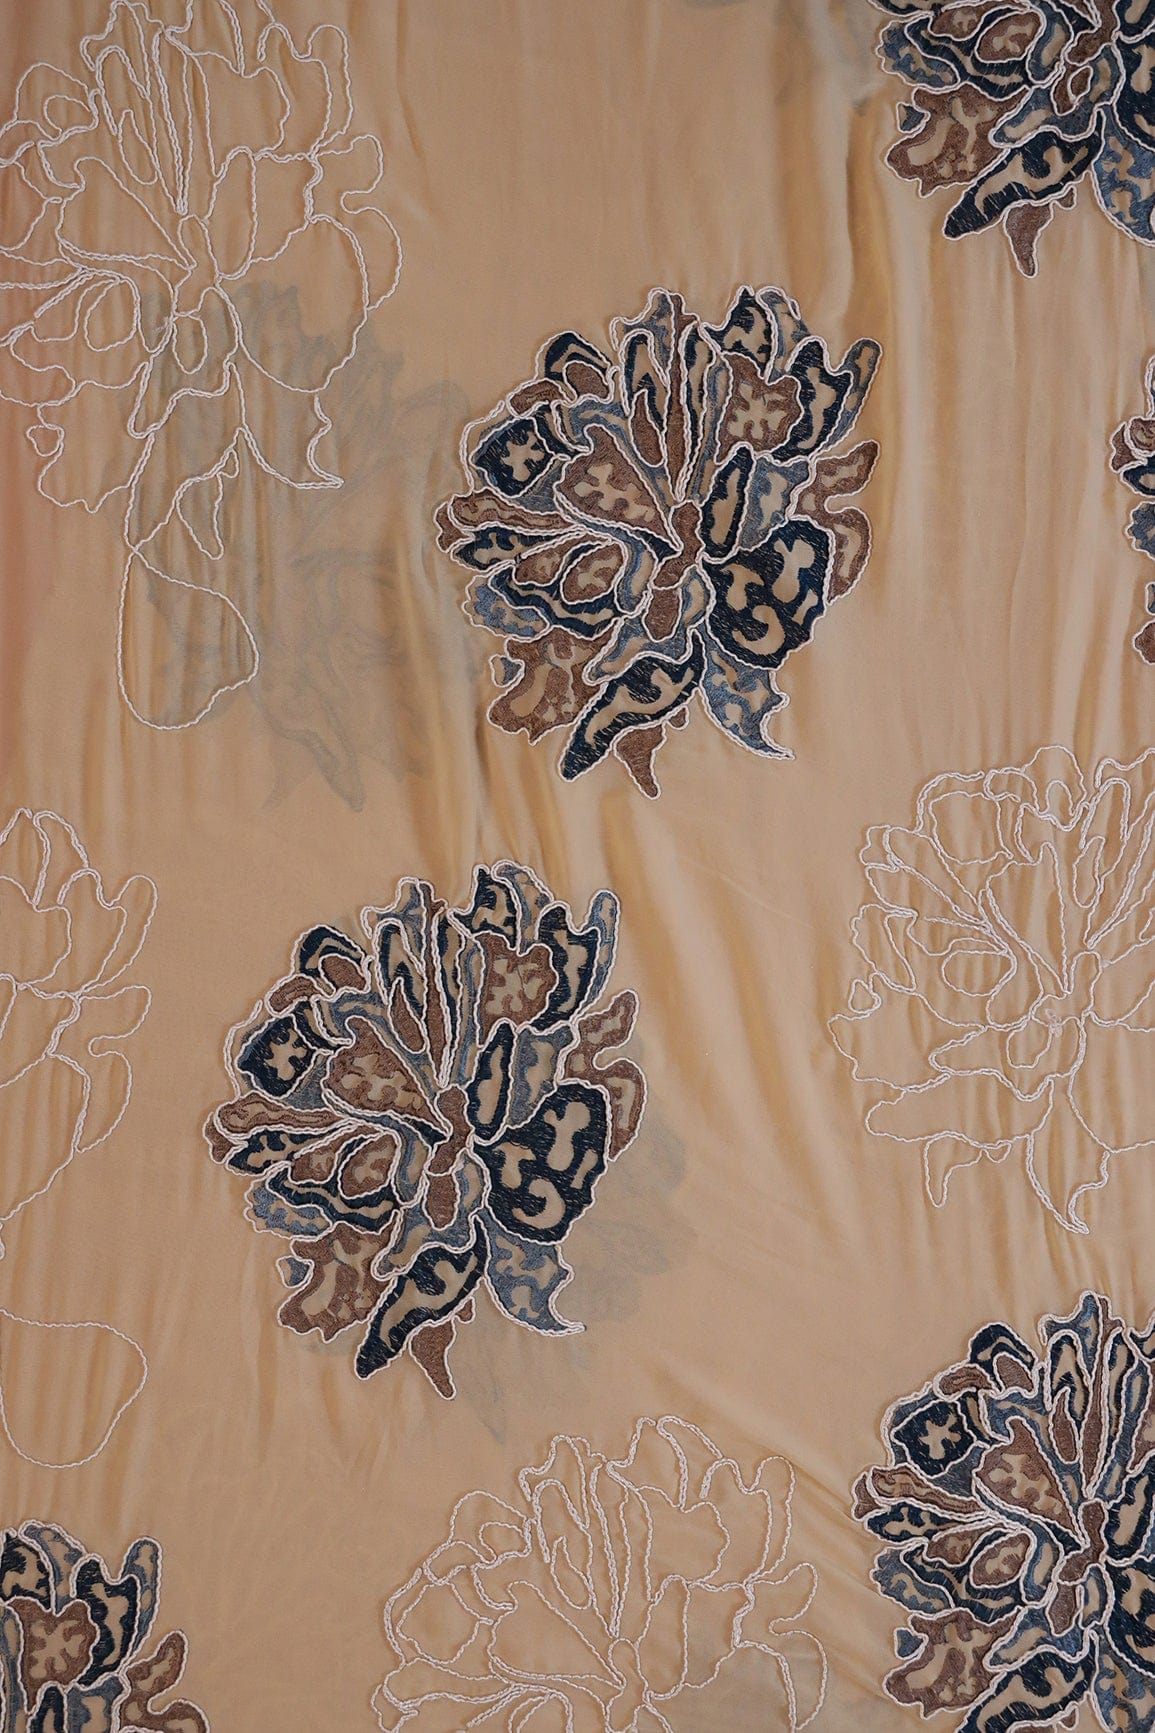 doeraa Embroidery Fabrics 1 Meter Cut Piece Of Multi Thread Floral Embroidery On Beige Georgette Fabric